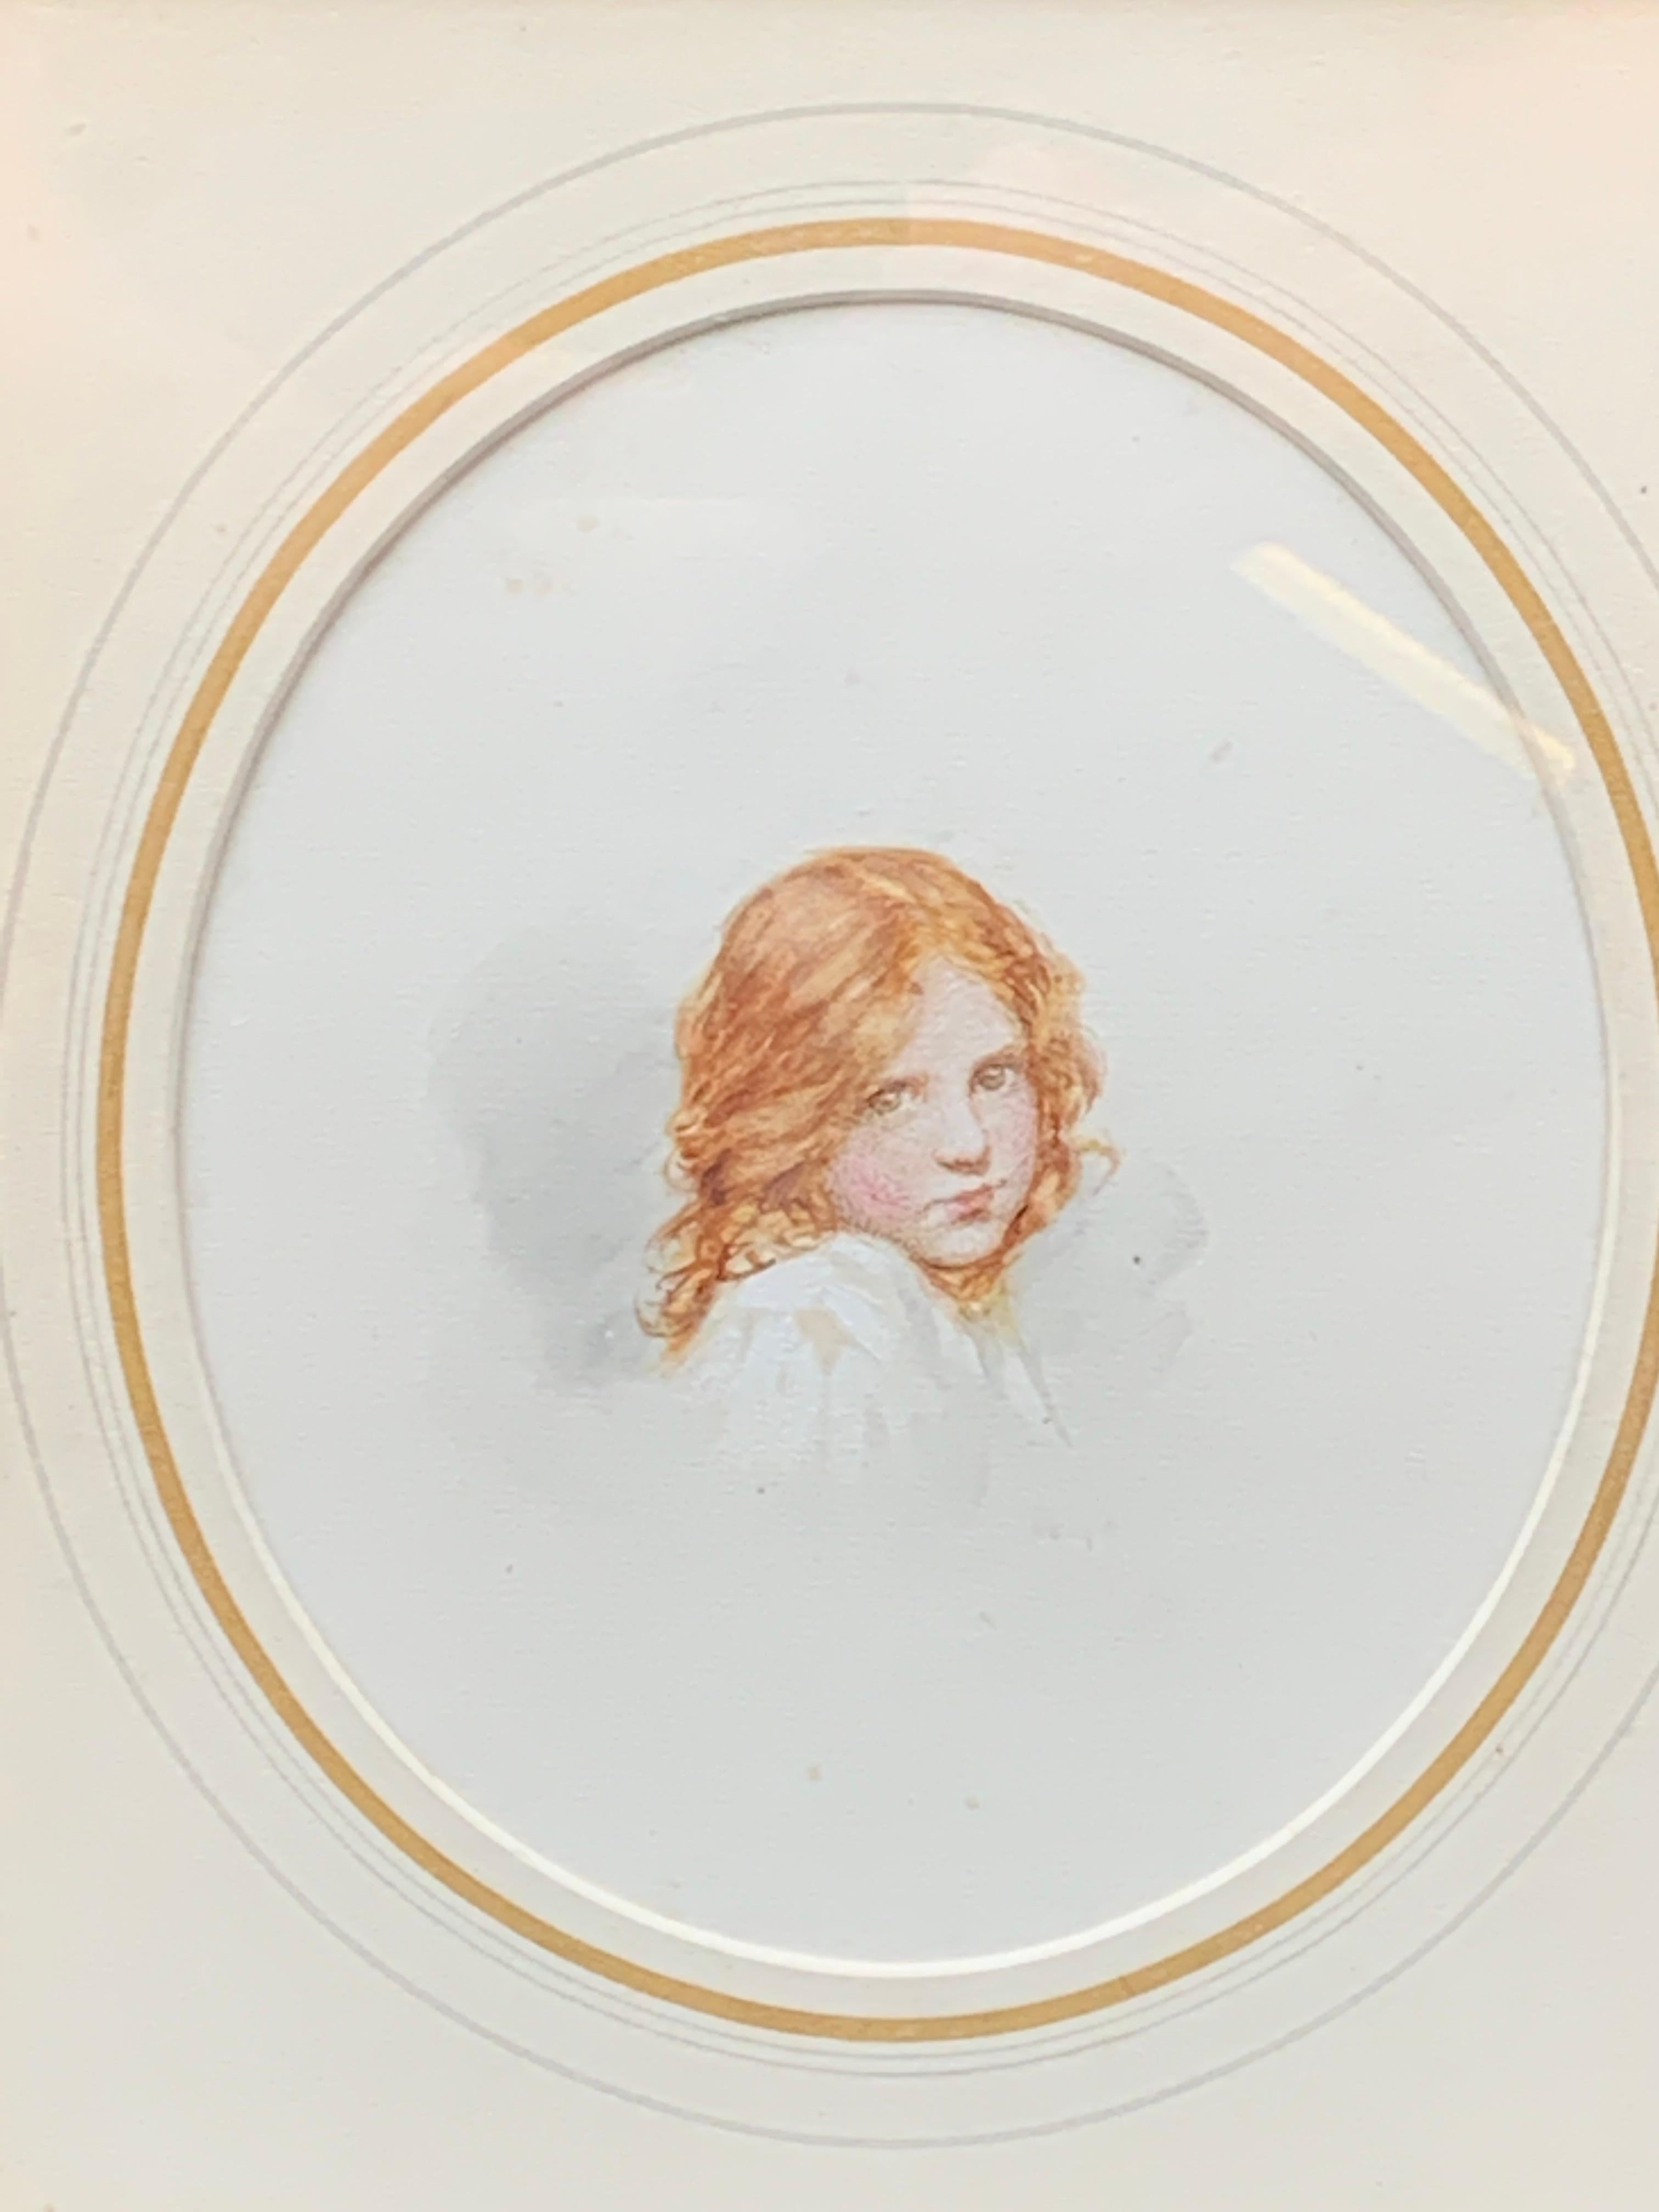 Early 20th century English portrait of a red haired young girl - Art by Louise Burrell